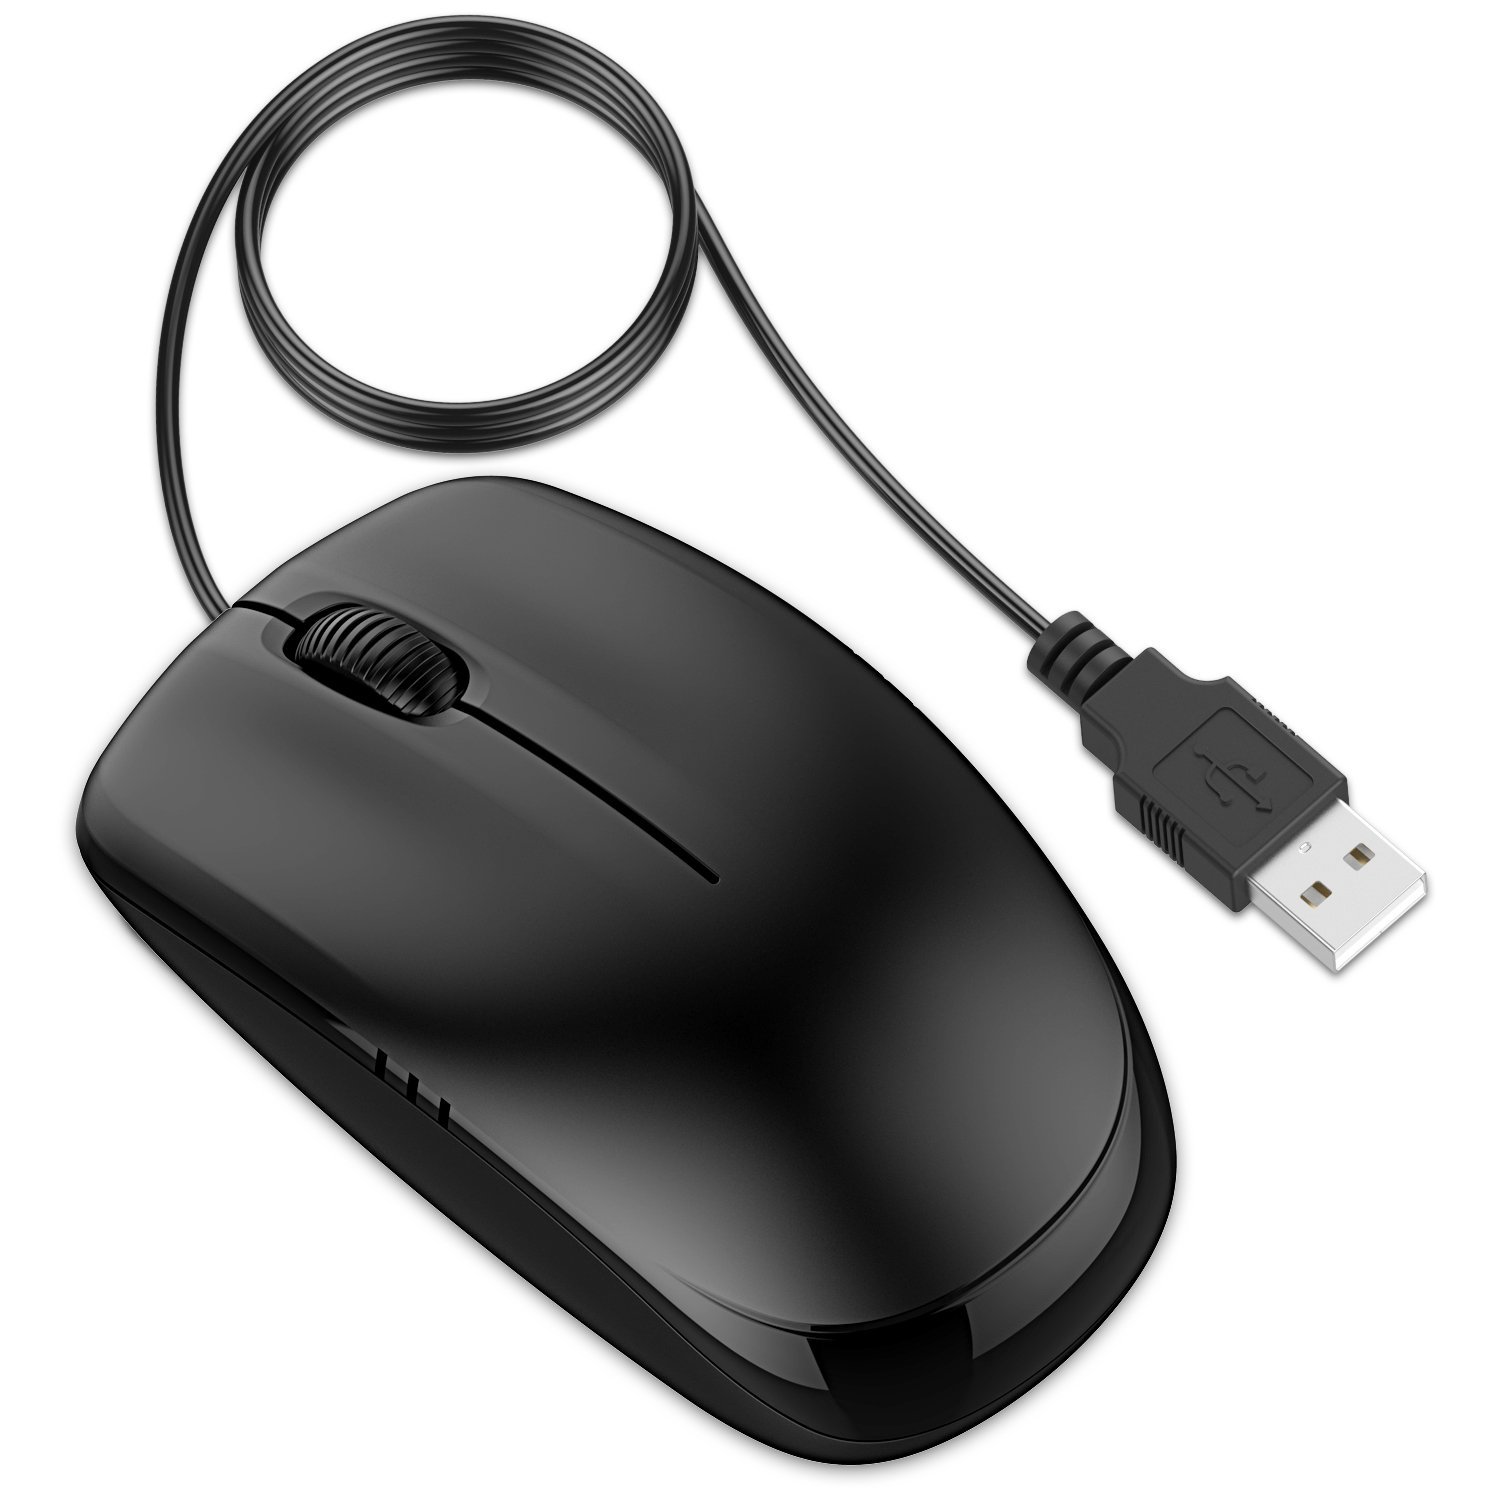 Amazon.com: JETech 3-Button Wired USB Optical Mouse Mice (Black ...